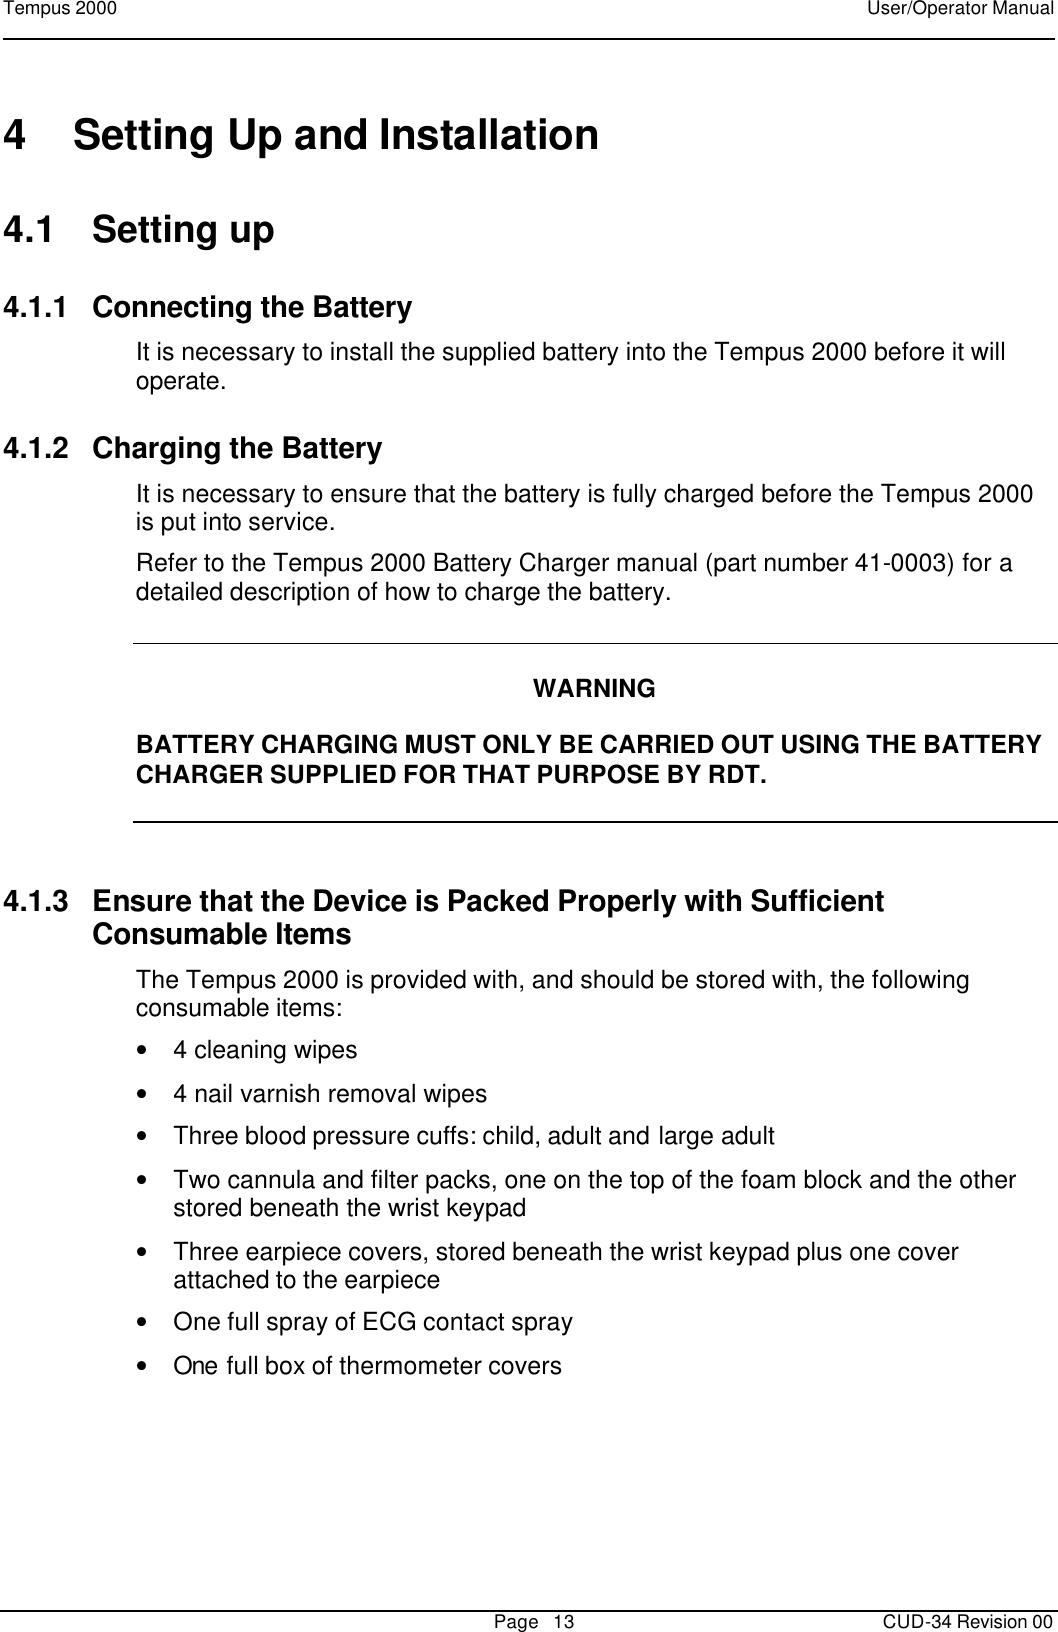 Tempus 2000    User/Operator Manual       Page   13   CUD-34 Revision 00 4 Setting Up and Installation 4.1 Setting up 4.1.1 Connecting the Battery It is necessary to install the supplied battery into the Tempus 2000 before it will operate.   4.1.2 Charging the Battery It is necessary to ensure that the battery is fully charged before the Tempus 2000 is put into service.   Refer to the Tempus 2000 Battery Charger manual (part number 41-0003) for a detailed description of how to charge the battery.   WARNING  BATTERY CHARGING MUST ONLY BE CARRIED OUT USING THE BATTERY CHARGER SUPPLIED FOR THAT PURPOSE BY RDT.  4.1.3 Ensure that the Device is Packed Properly with Sufficient Consumable Items The Tempus 2000 is provided with, and should be stored with, the following consumable items: • 4 cleaning wipes • 4 nail varnish removal wipes • Three blood pressure cuffs: child, adult and large adult • Two cannula and filter packs, one on the top of the foam block and the other stored beneath the wrist keypad • Three earpiece covers, stored beneath the wrist keypad plus one cover attached to the earpiece • One full spray of ECG contact spray • One full box of thermometer covers  